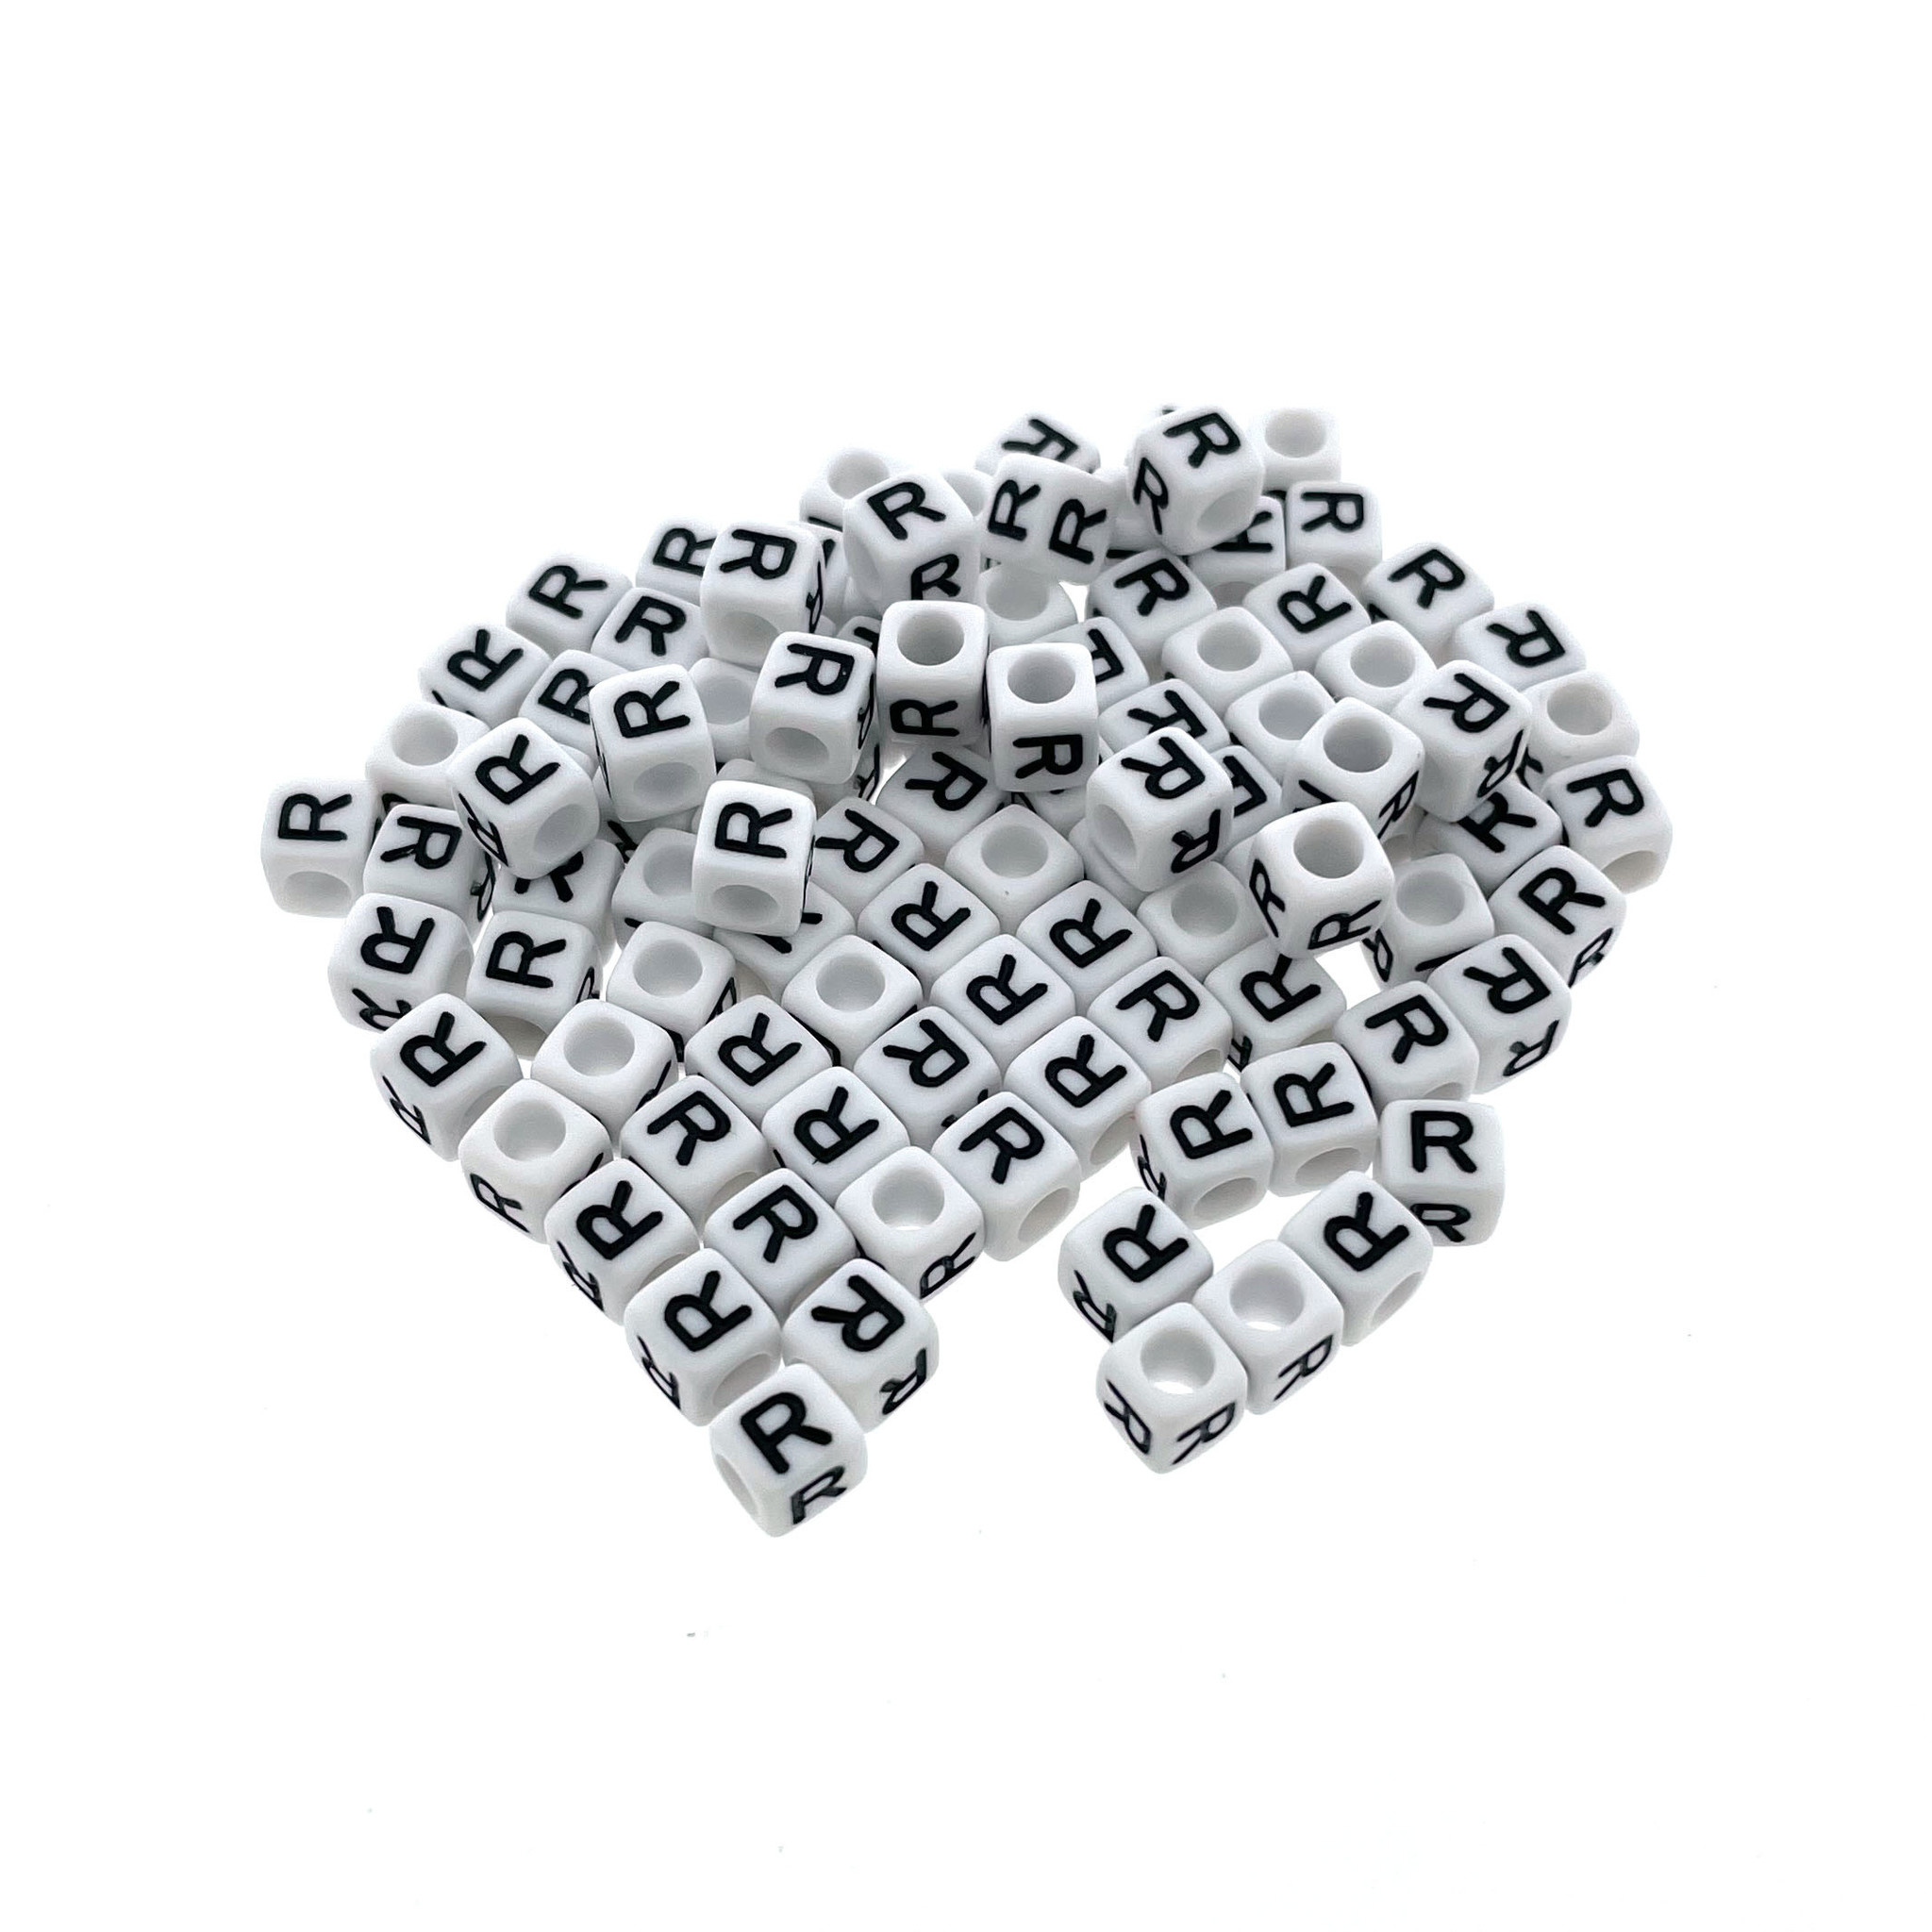 Buy Paracord alphabet letter beads White D at 123Paracord - 123Paracord